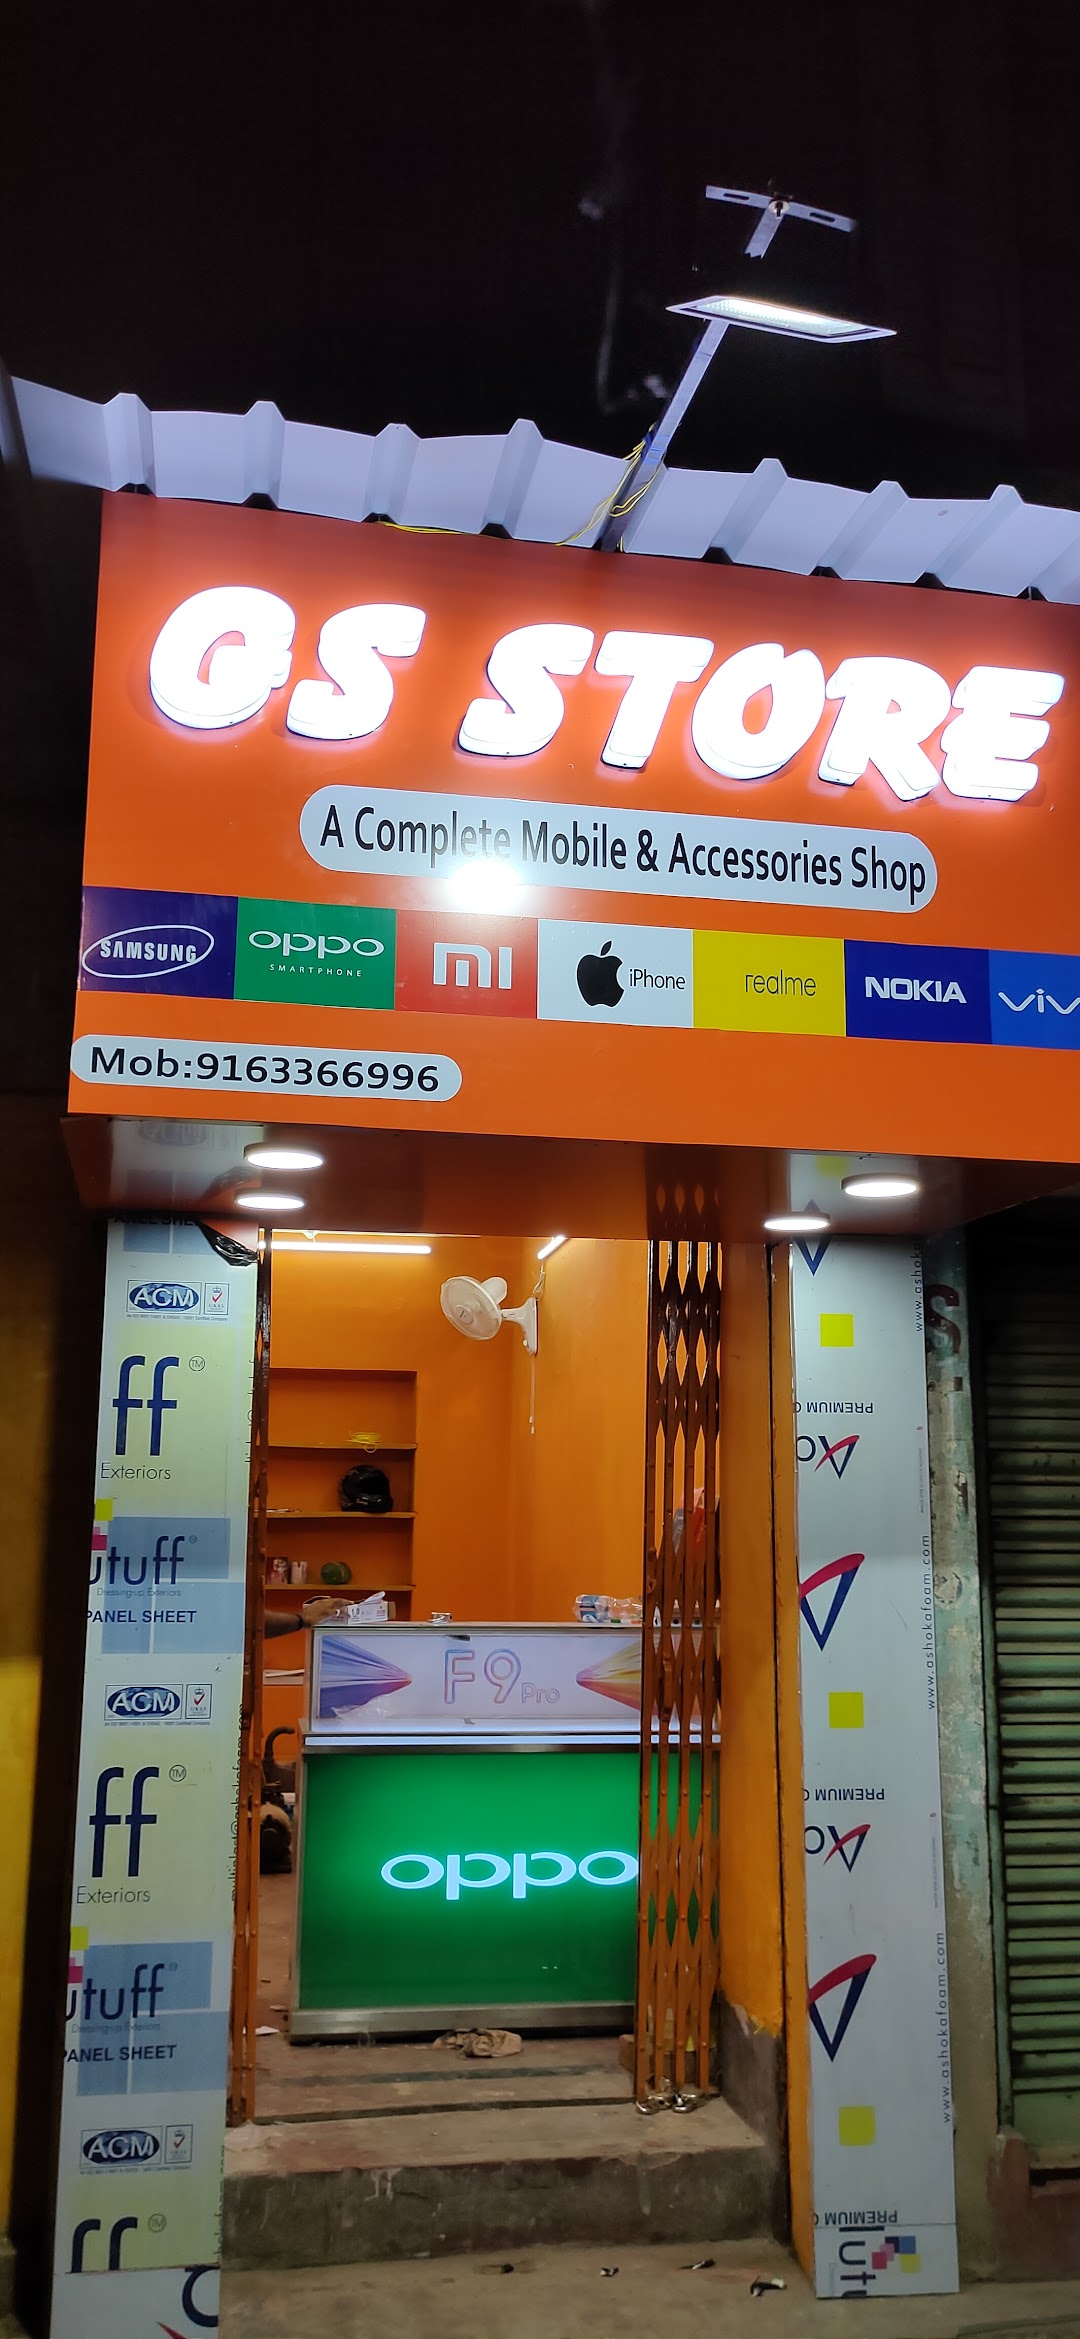 Gs store all mobile and mobile accessories shop